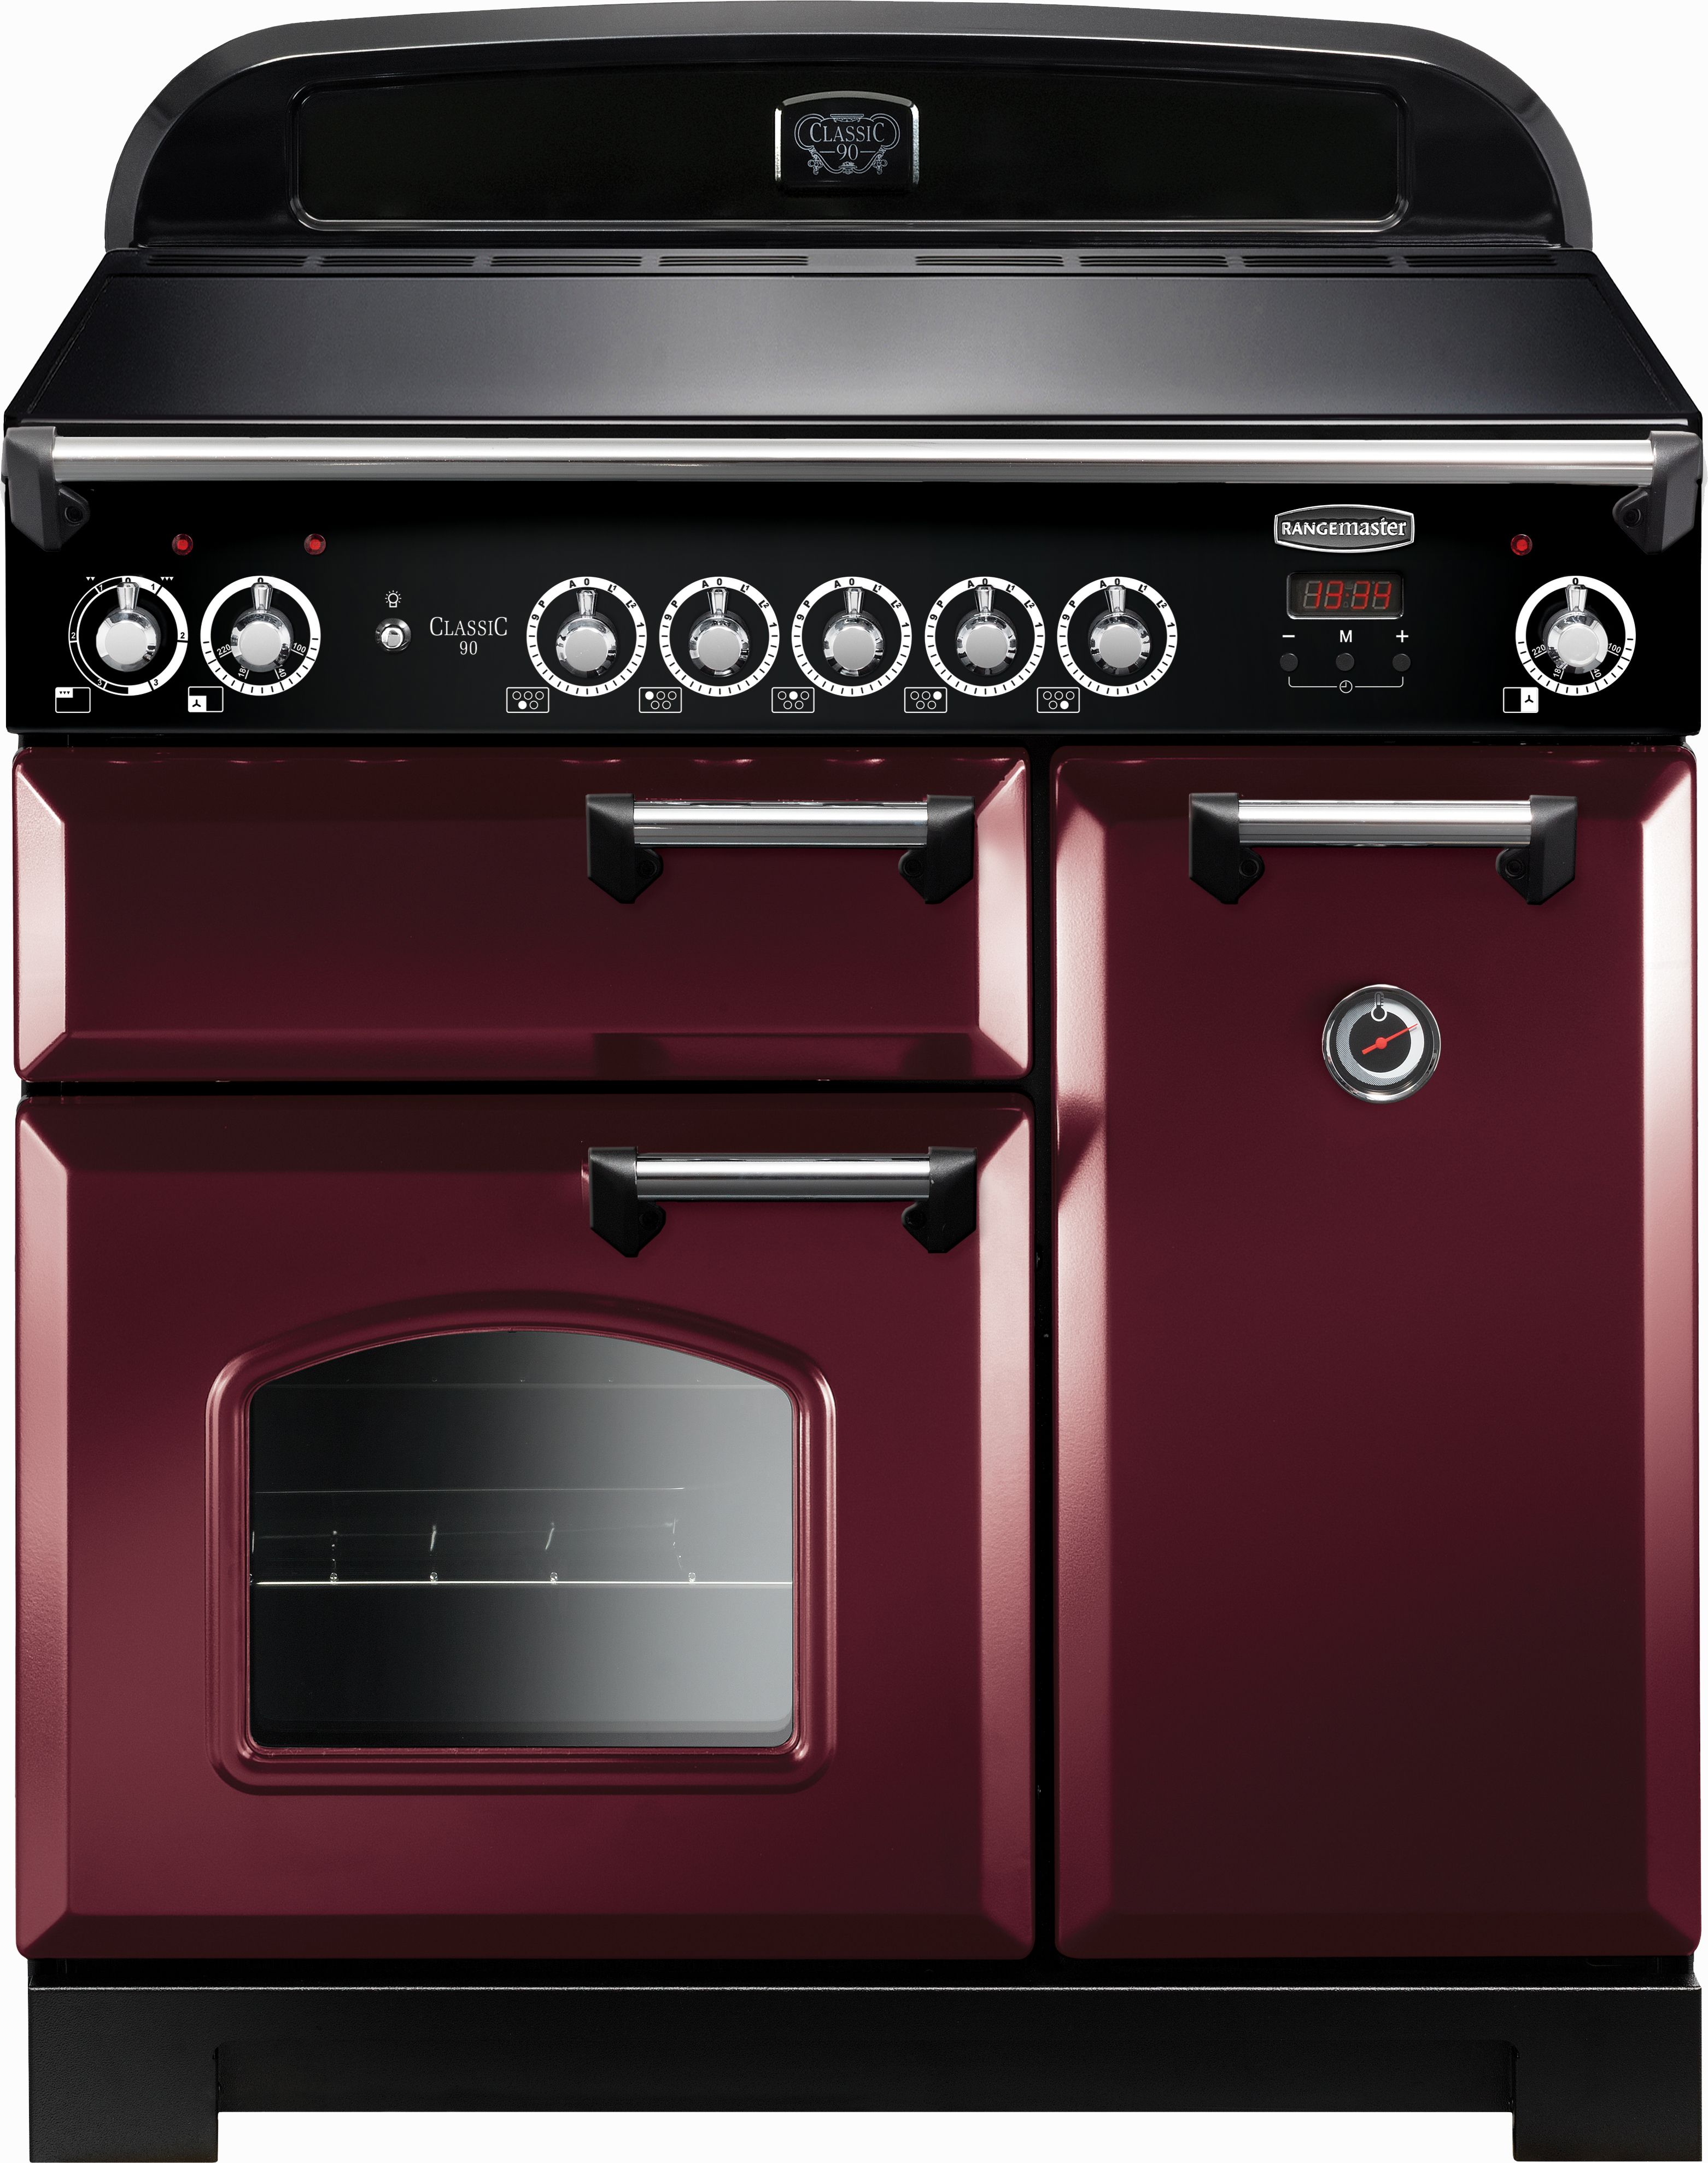 Rangemaster Classic CLA90EICY/C 90cm Electric Range Cooker with Induction Hob - Cranberry / Chrome - A/A Rated, Red